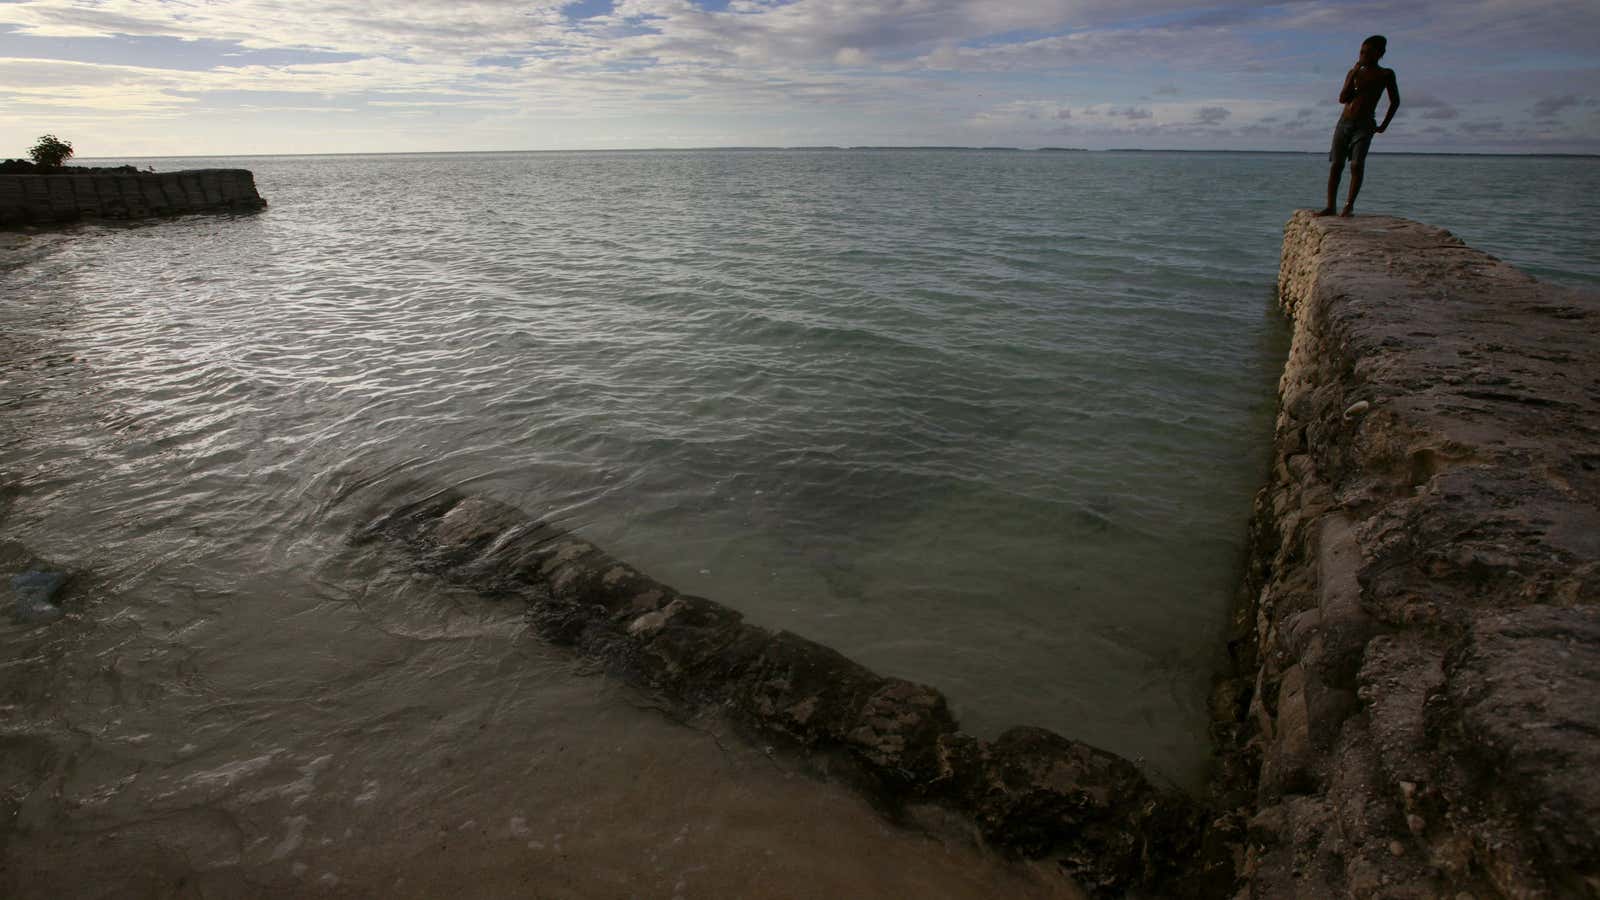 Sea walls like these haven’t been enough to stop the steady rise of the seas around Kiribati.